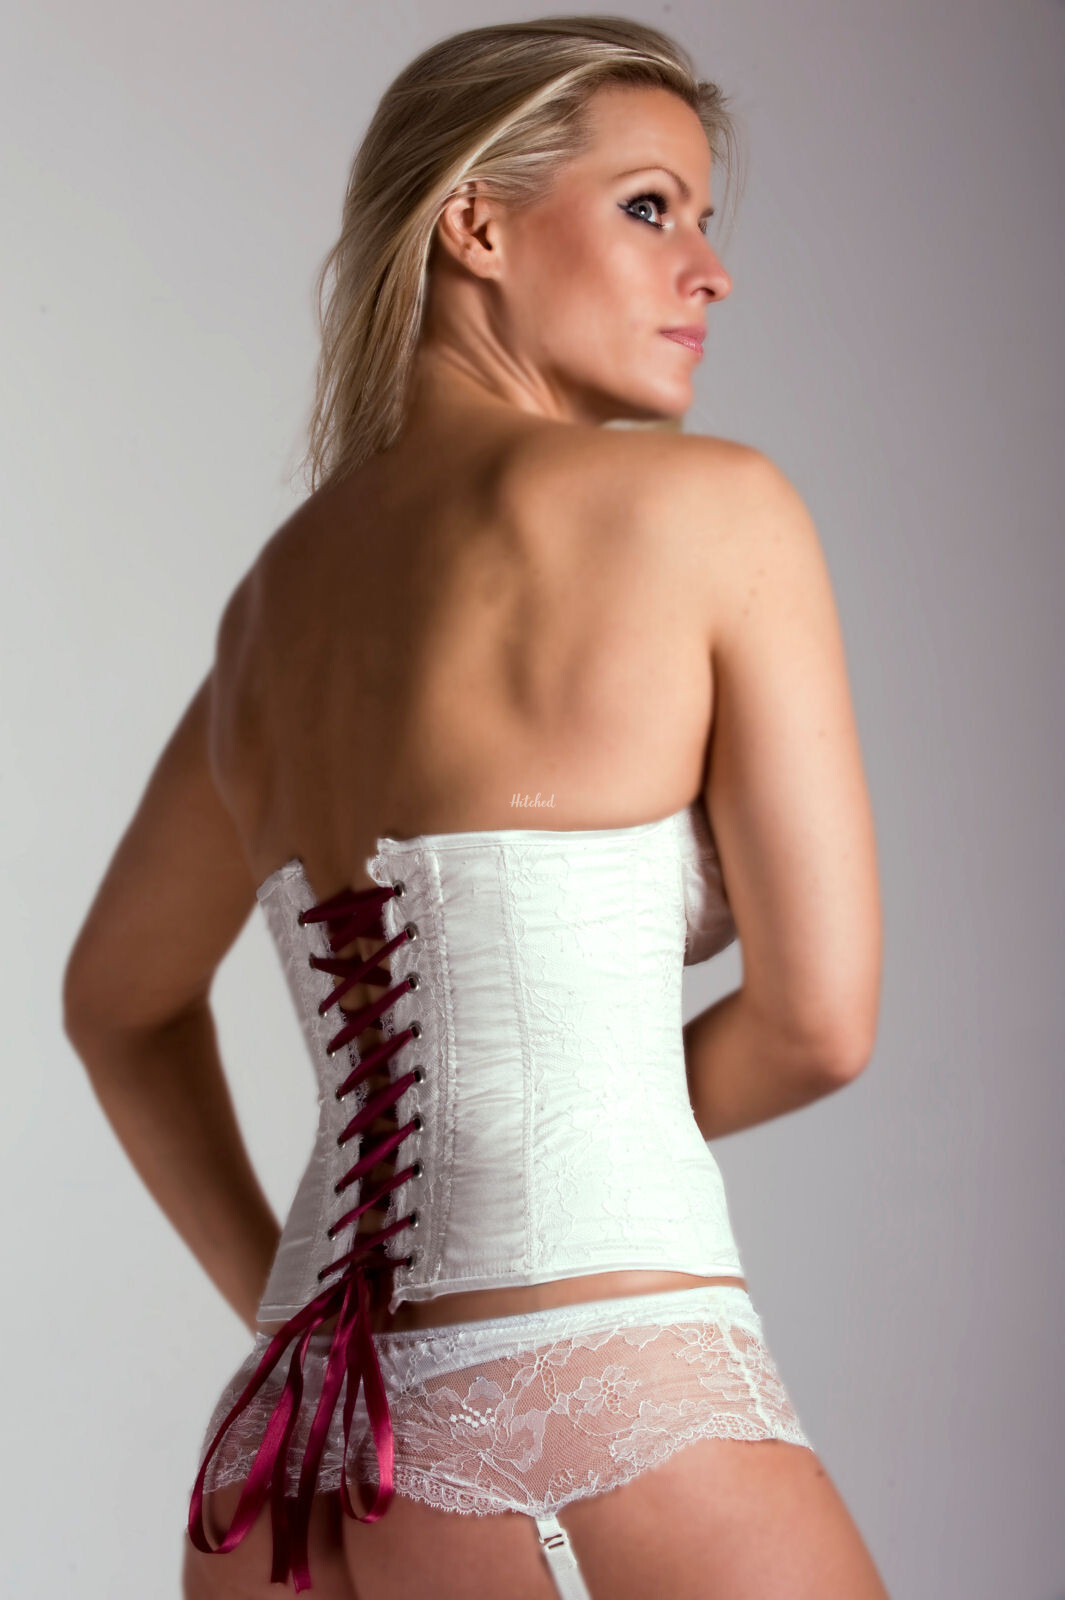 Corset 1 Wedding Dress from Bespoke Lingerie - hitched.co.uk